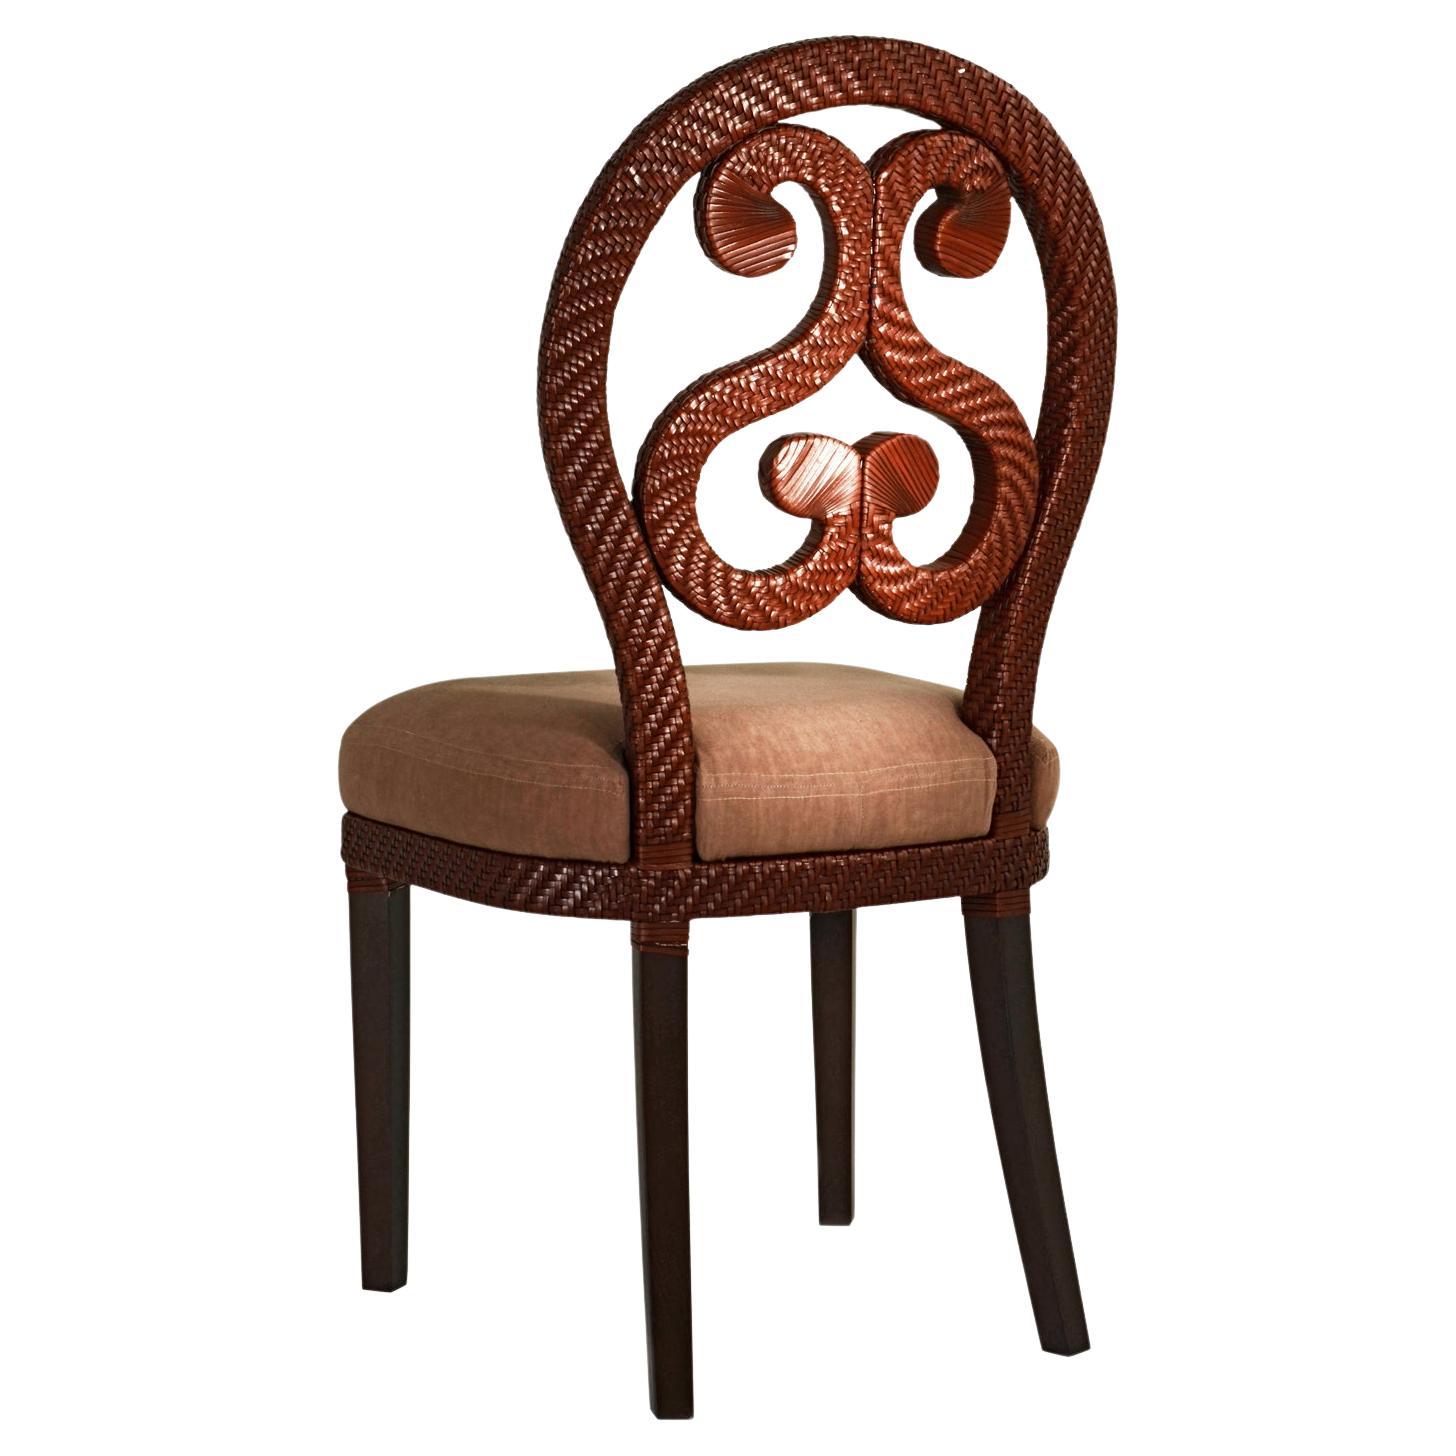 21st Century Home Collection Brown Braided Leather Chair by Patrizia Garganti For Sale